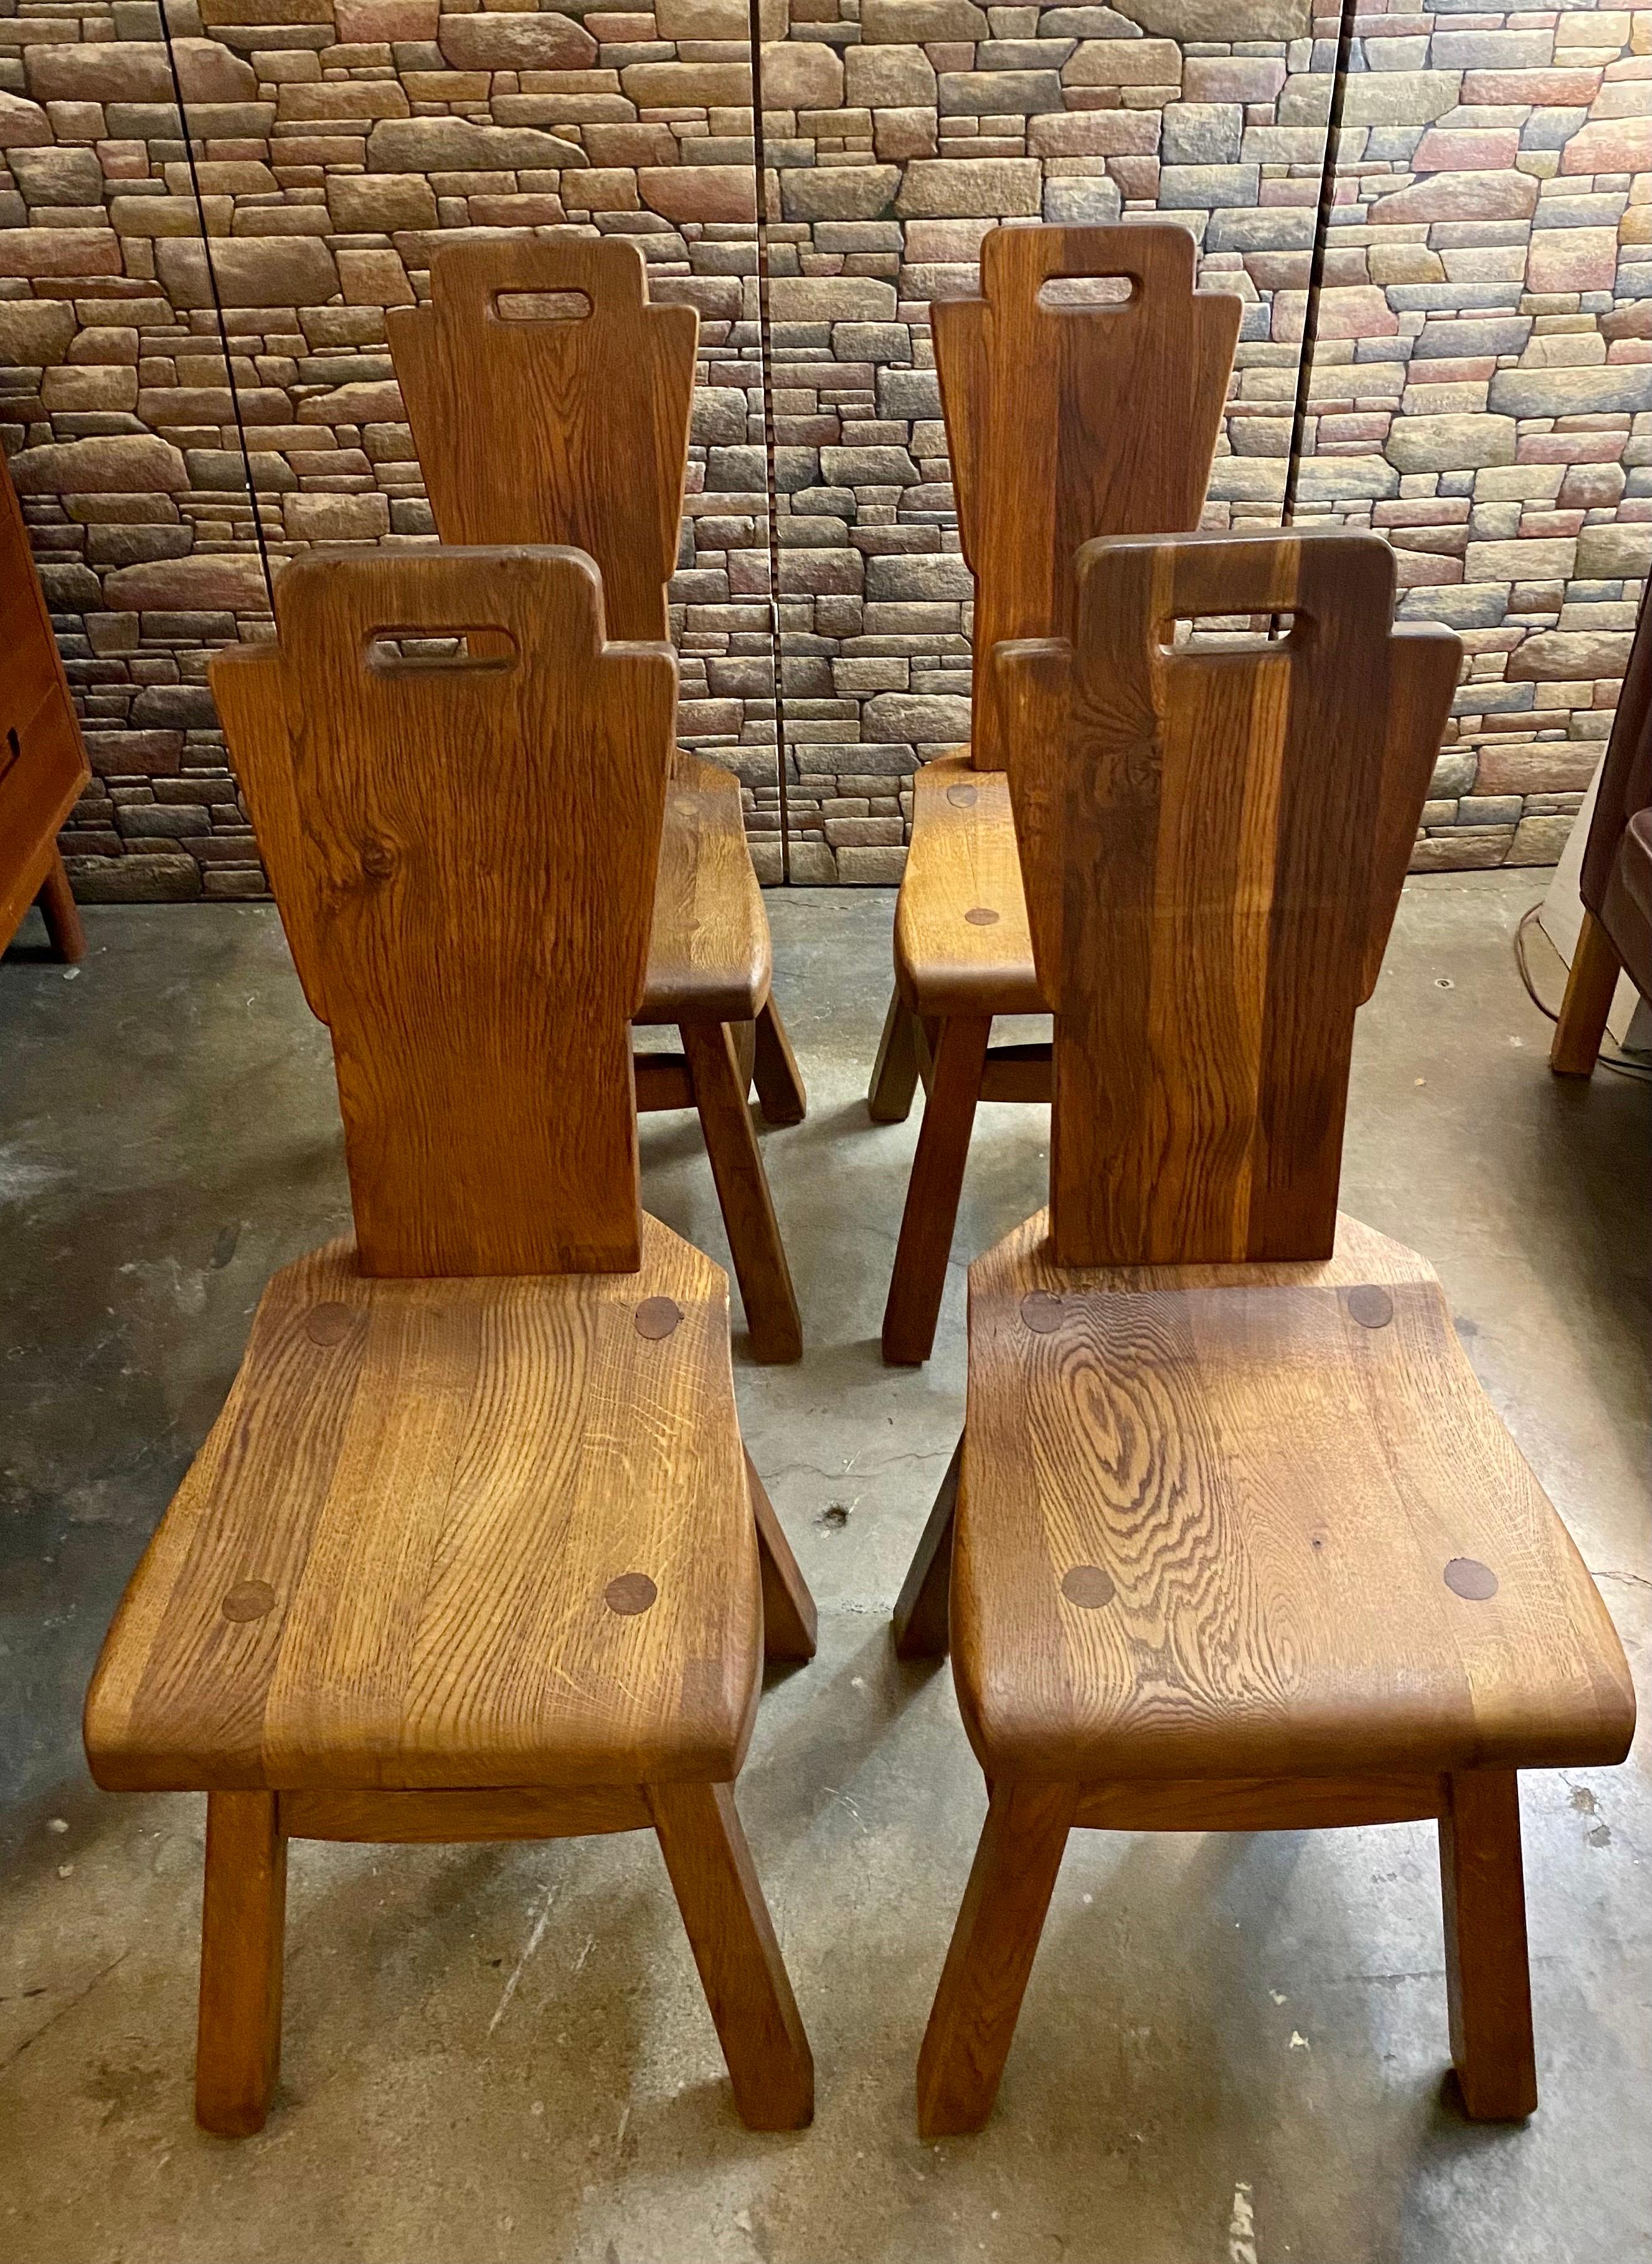 Set of 4 Brutalist Oak Dining Chairs, Netherlands, Circa 1970s For Sale 6